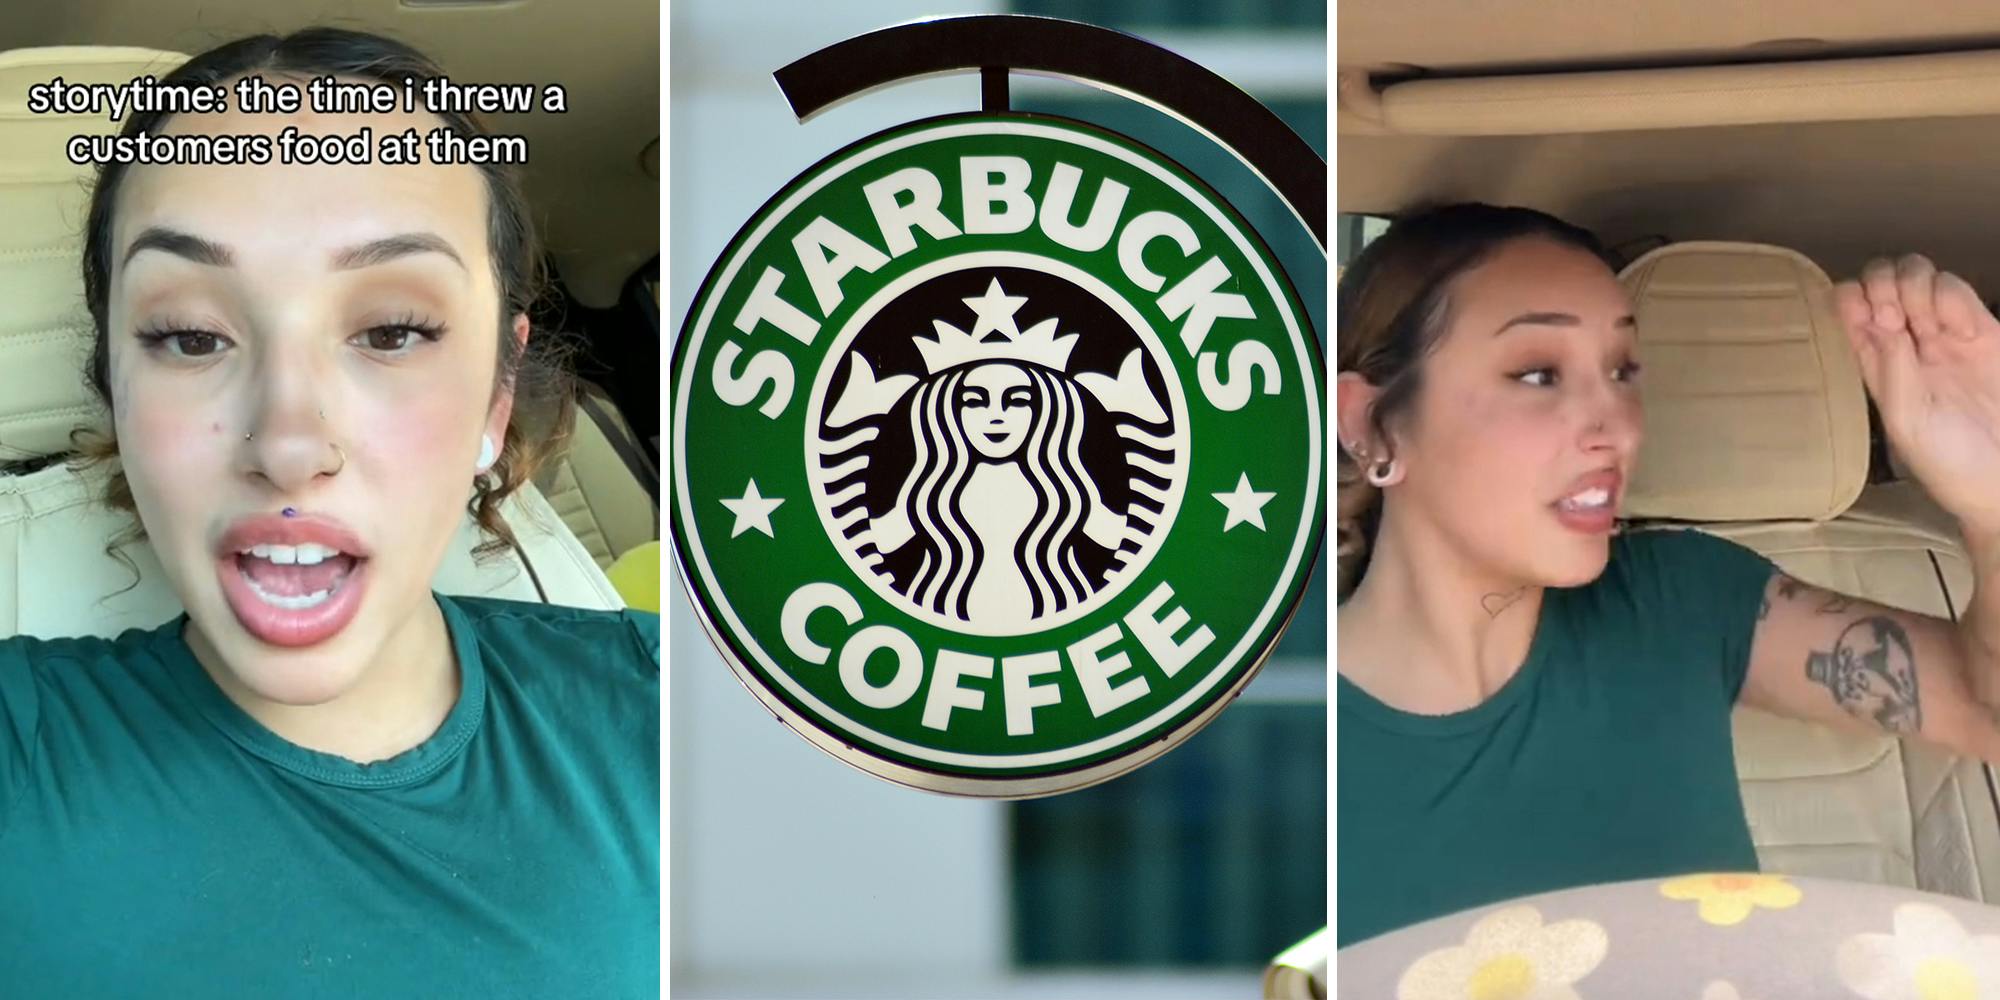 Viewers Defend Starbucks Worker Who Threw Food at Customer